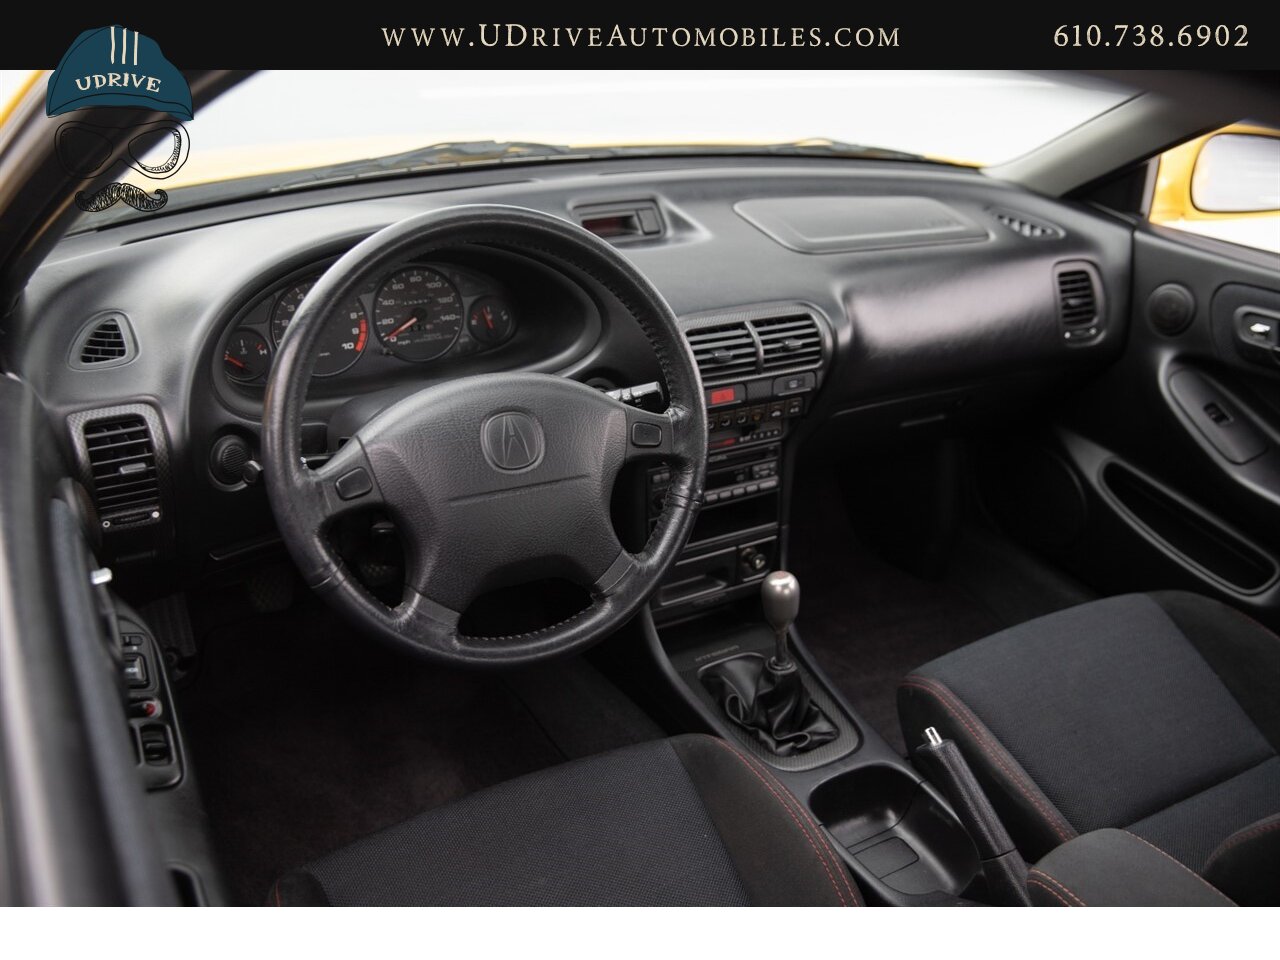 2001 Acura Integra Type R  38k Miles 2 Owners - Photo 31 - West Chester, PA 19382